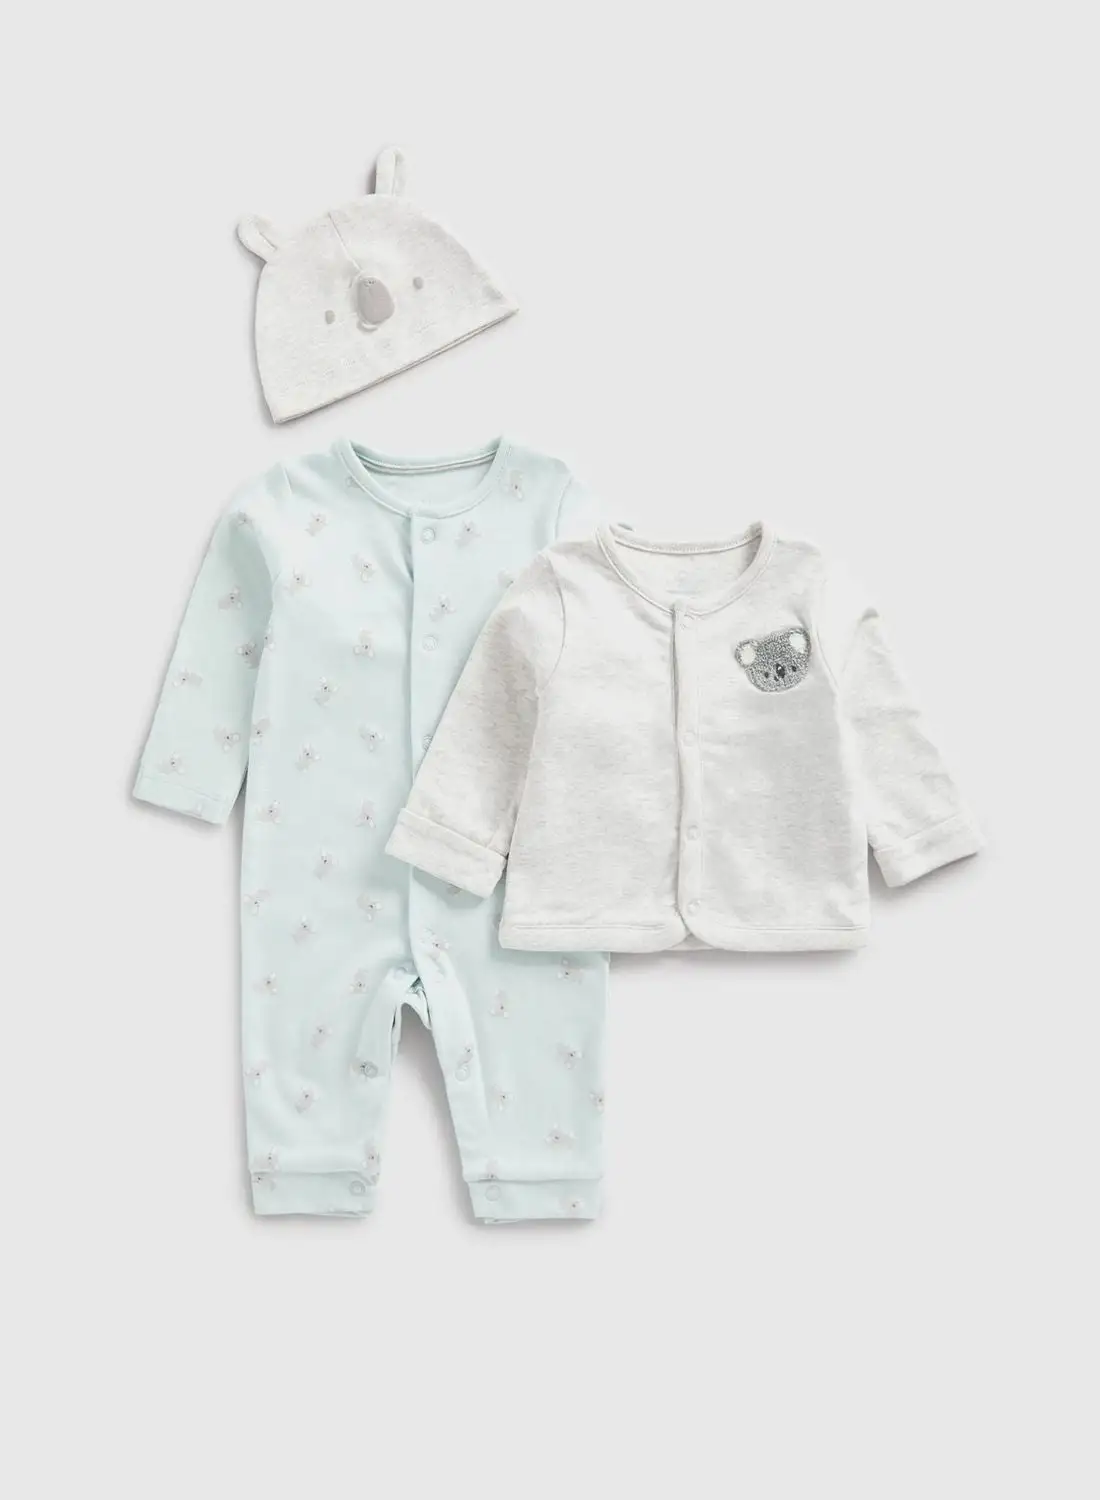 mothercare Kids 3 Piece Gift Set